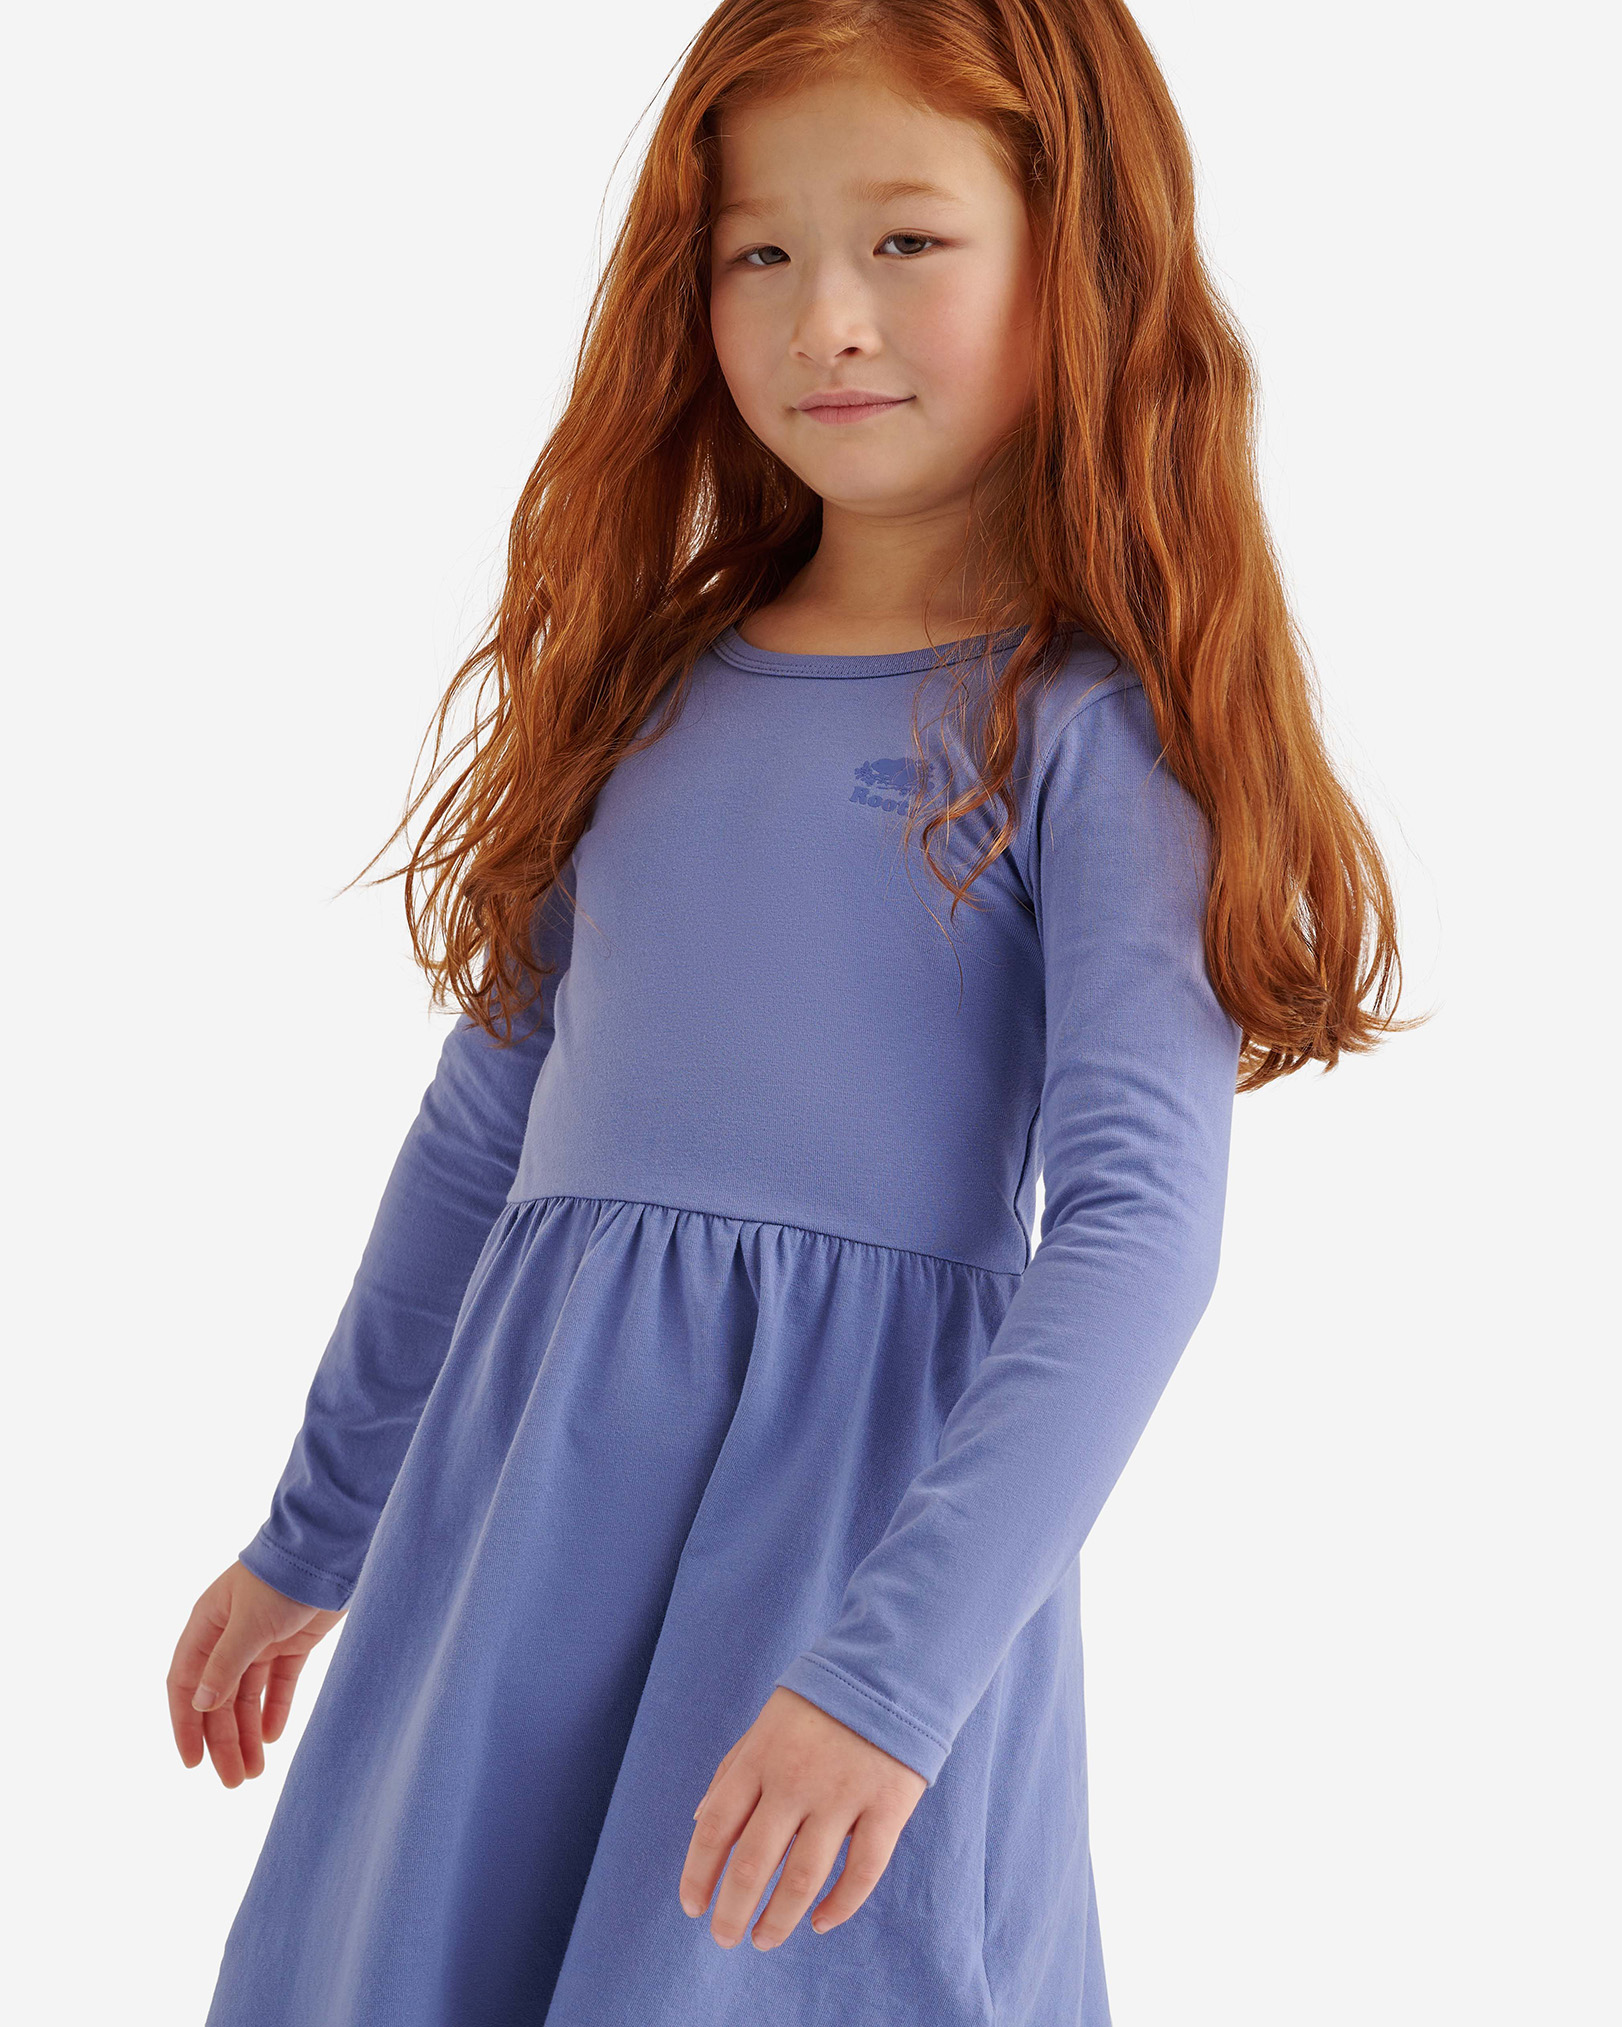 Roots Girl's Easy Stretch Dress in Periwinkle Purple